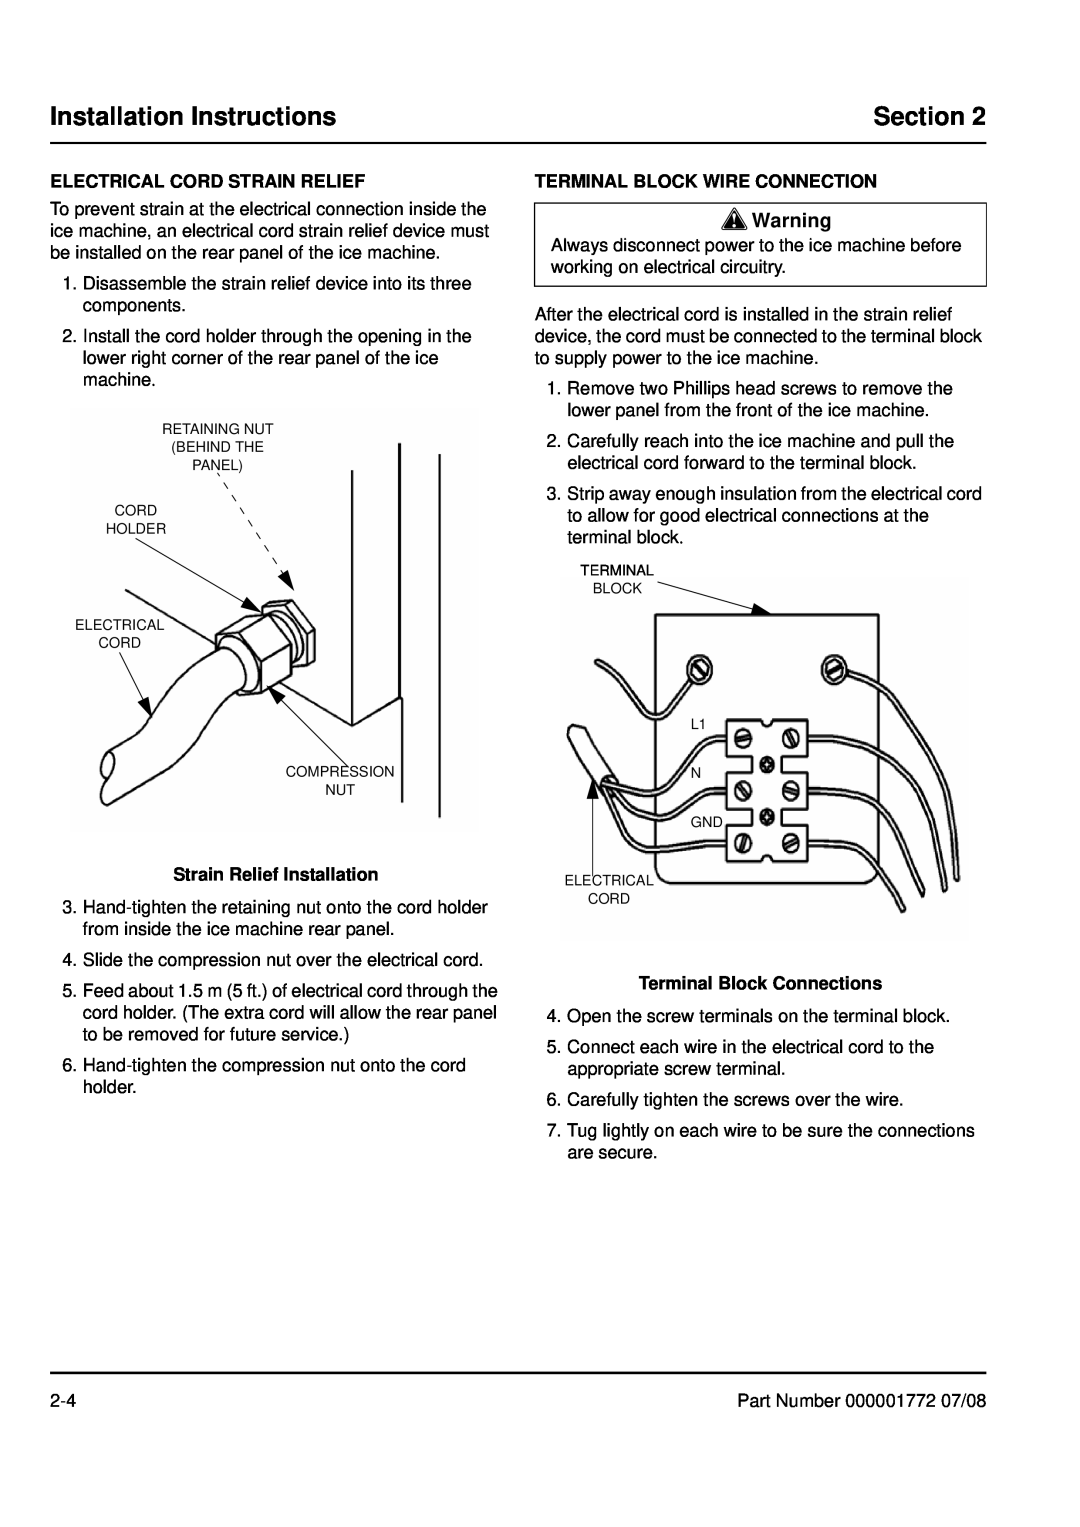 Manitowoc Ice QM30 manual Installation Instructions, Section, Electrical Cord Strain Relief, Strain Relief Installation 